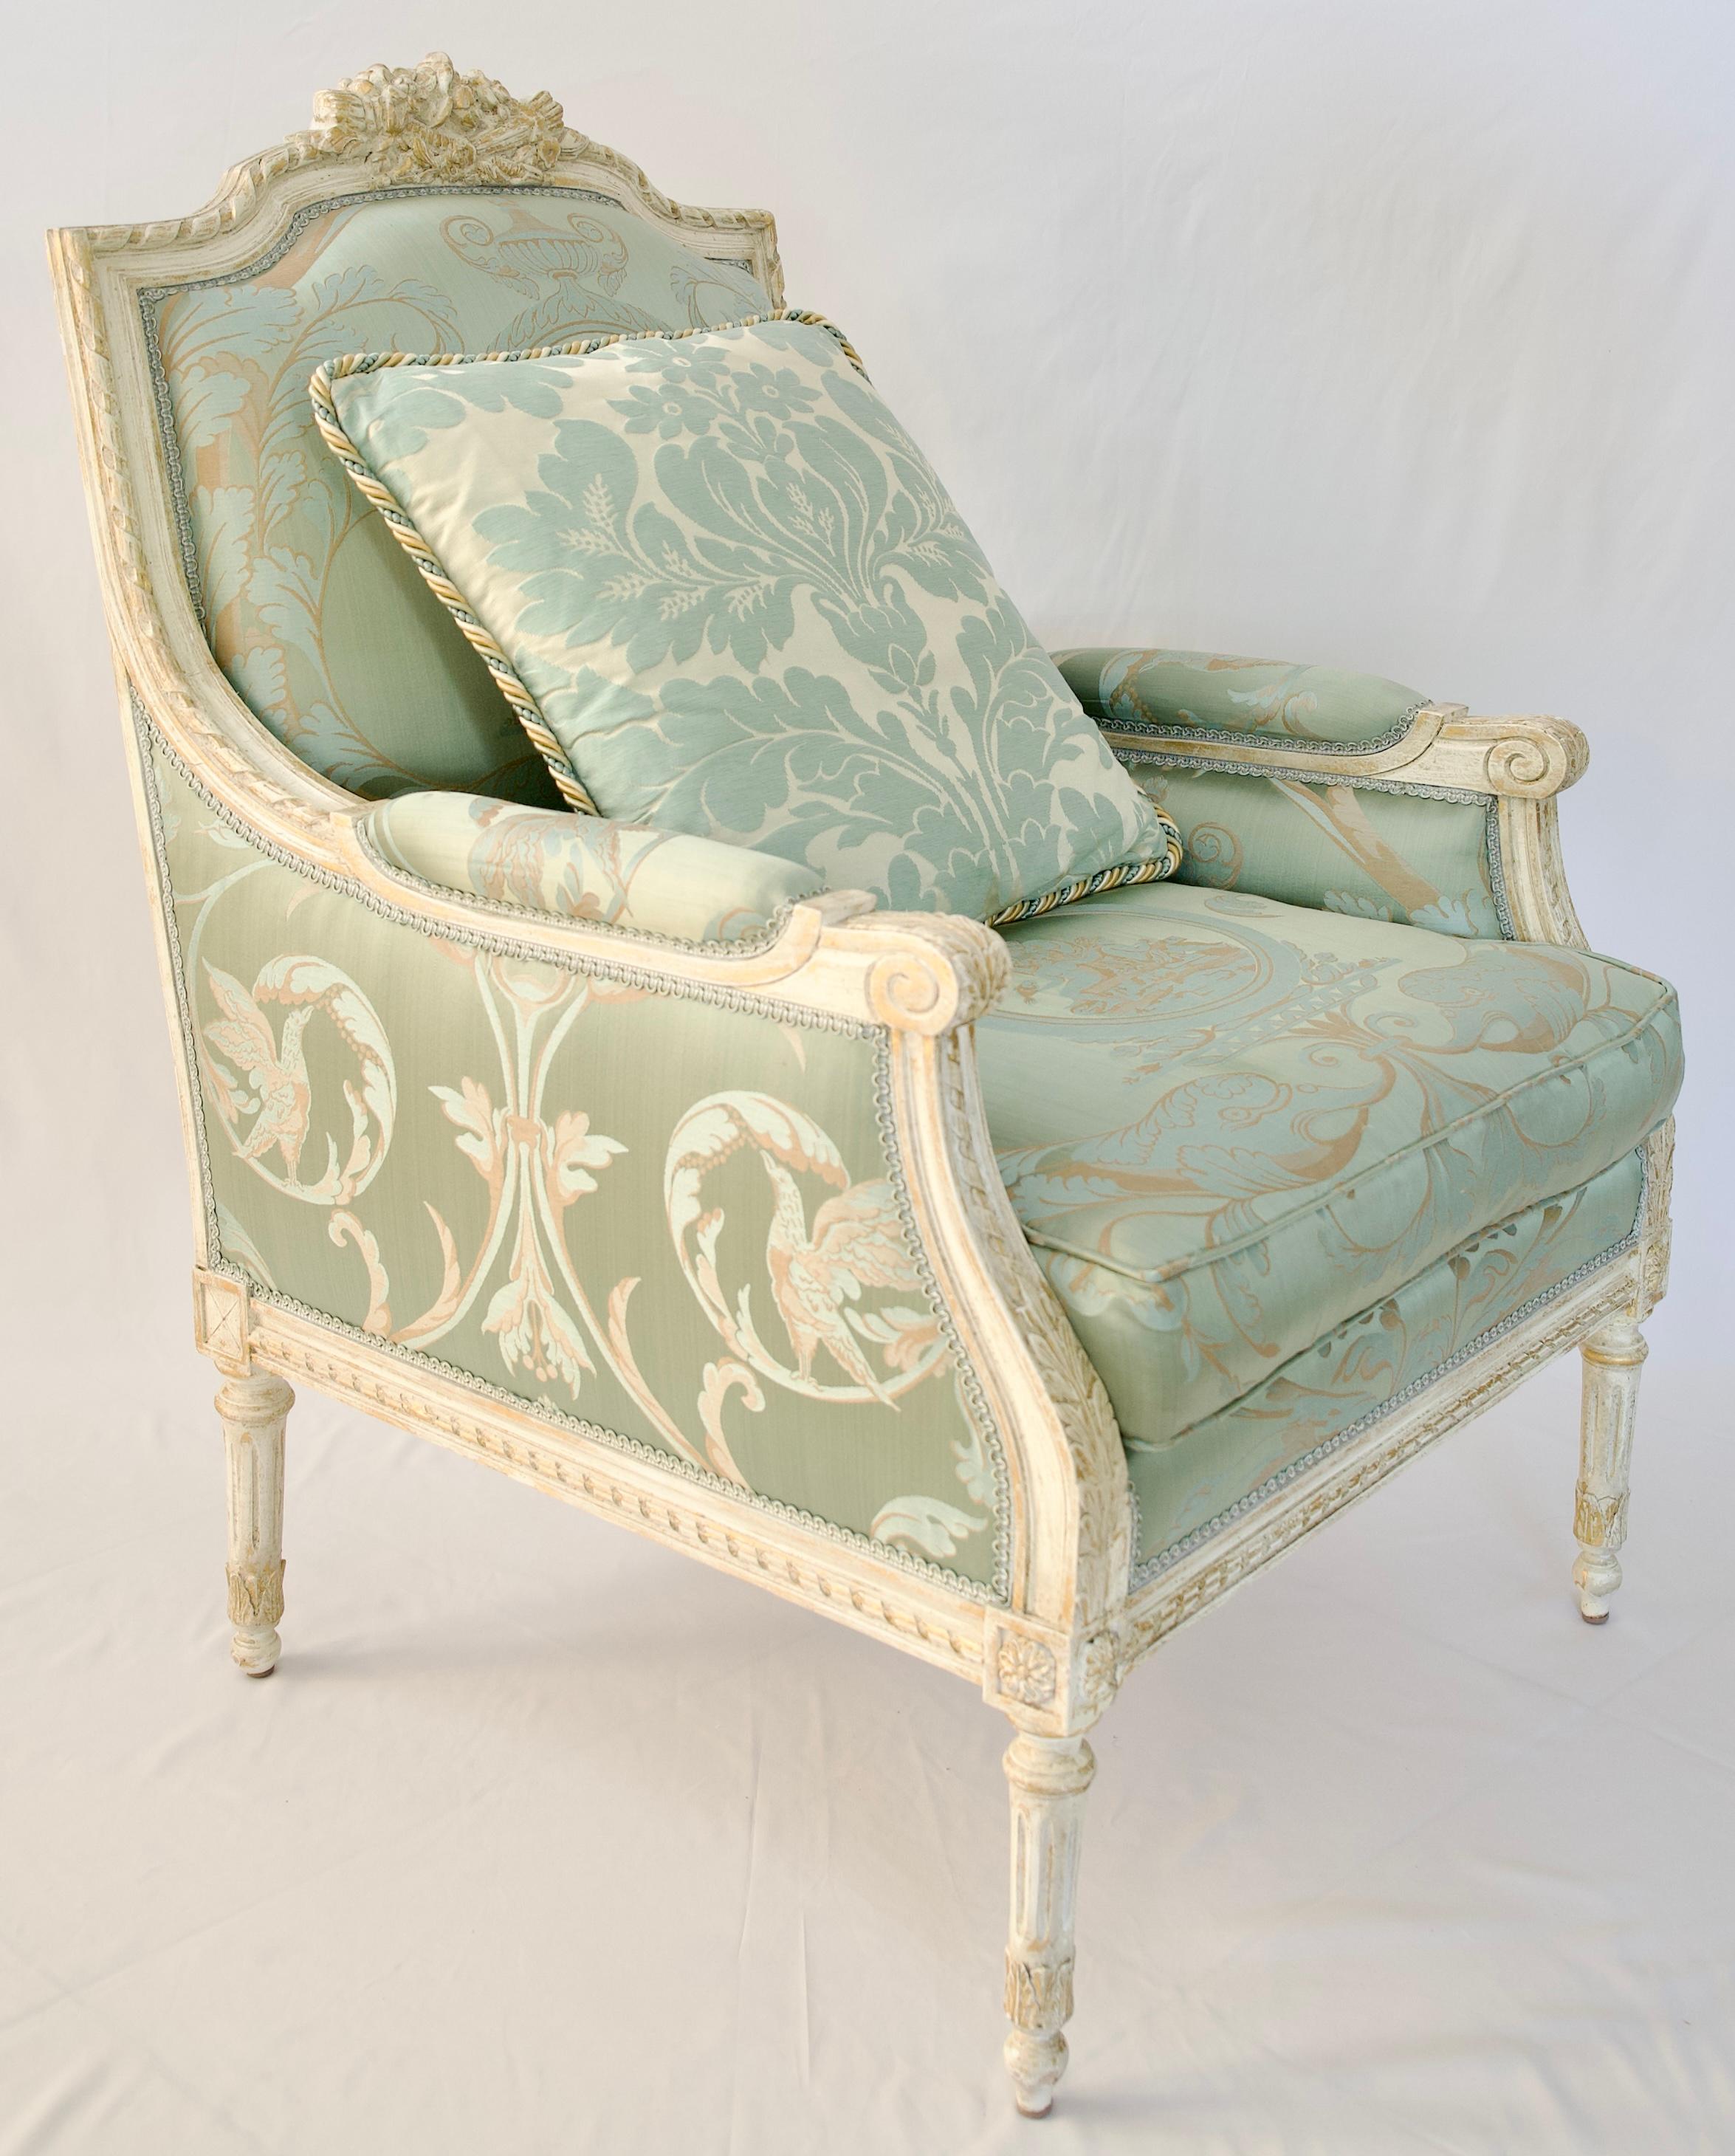 A fine quality pair of Louis XVI style Bergère armchairs hand-painted with great attention to details. The Lelievre silk fabric and color of the upholstery makes these armchairs particularly pleasing to the eye and wonderful choices. Custom pillows